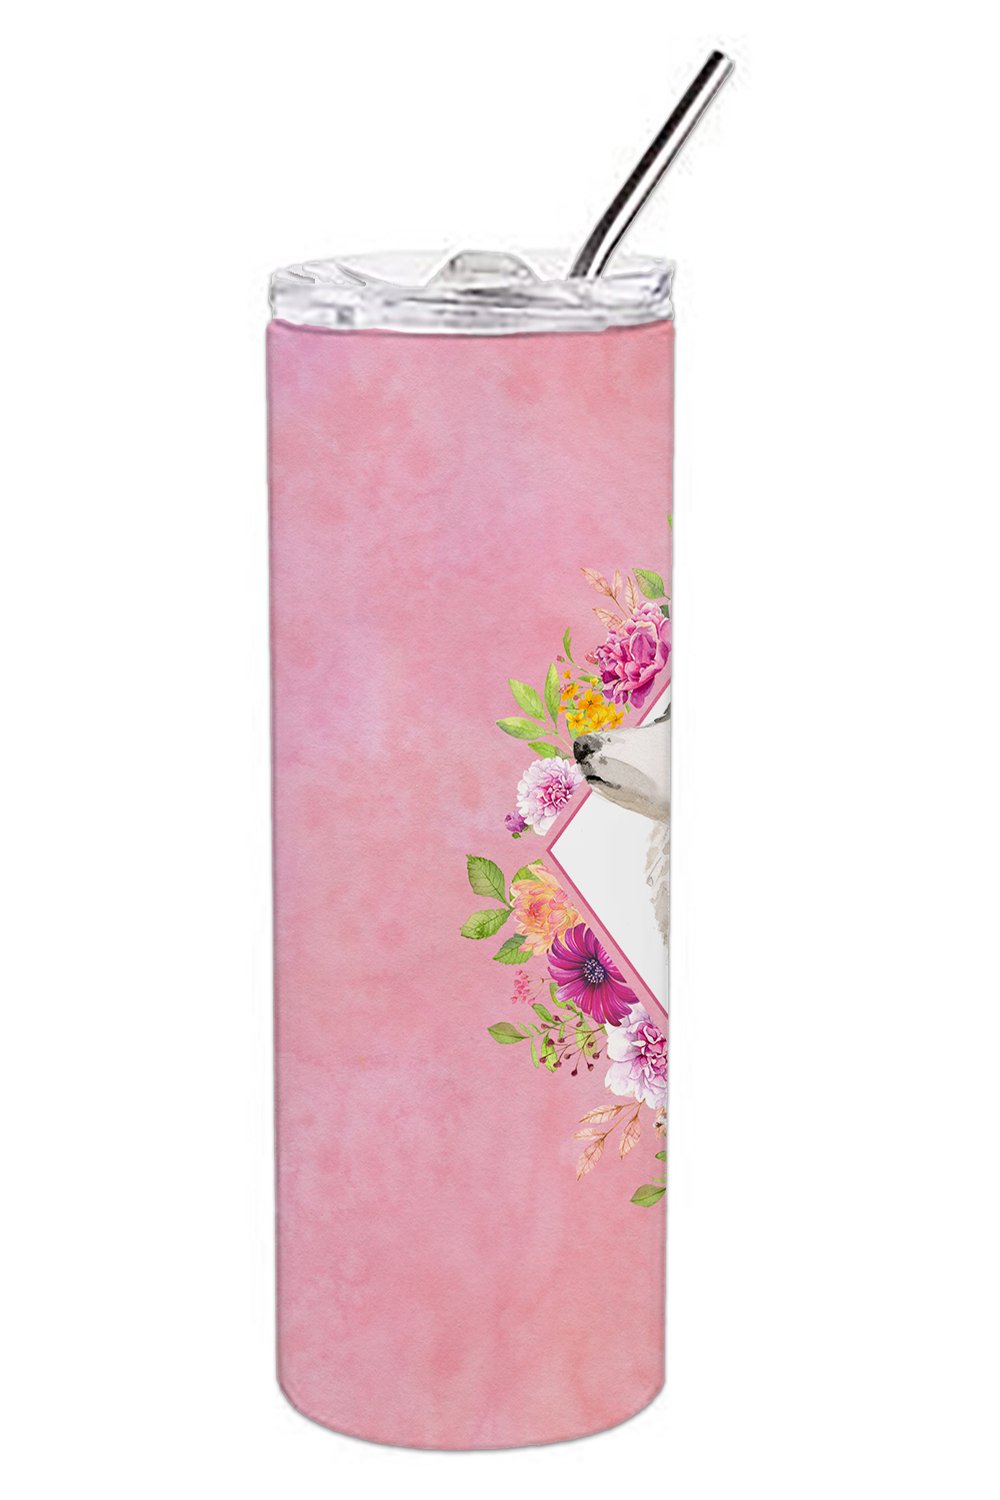 Border Collie Pink Flowers Double Walled Stainless Steel 20 oz Skinny Tumbler CK4258TBL20 by Caroline's Treasures